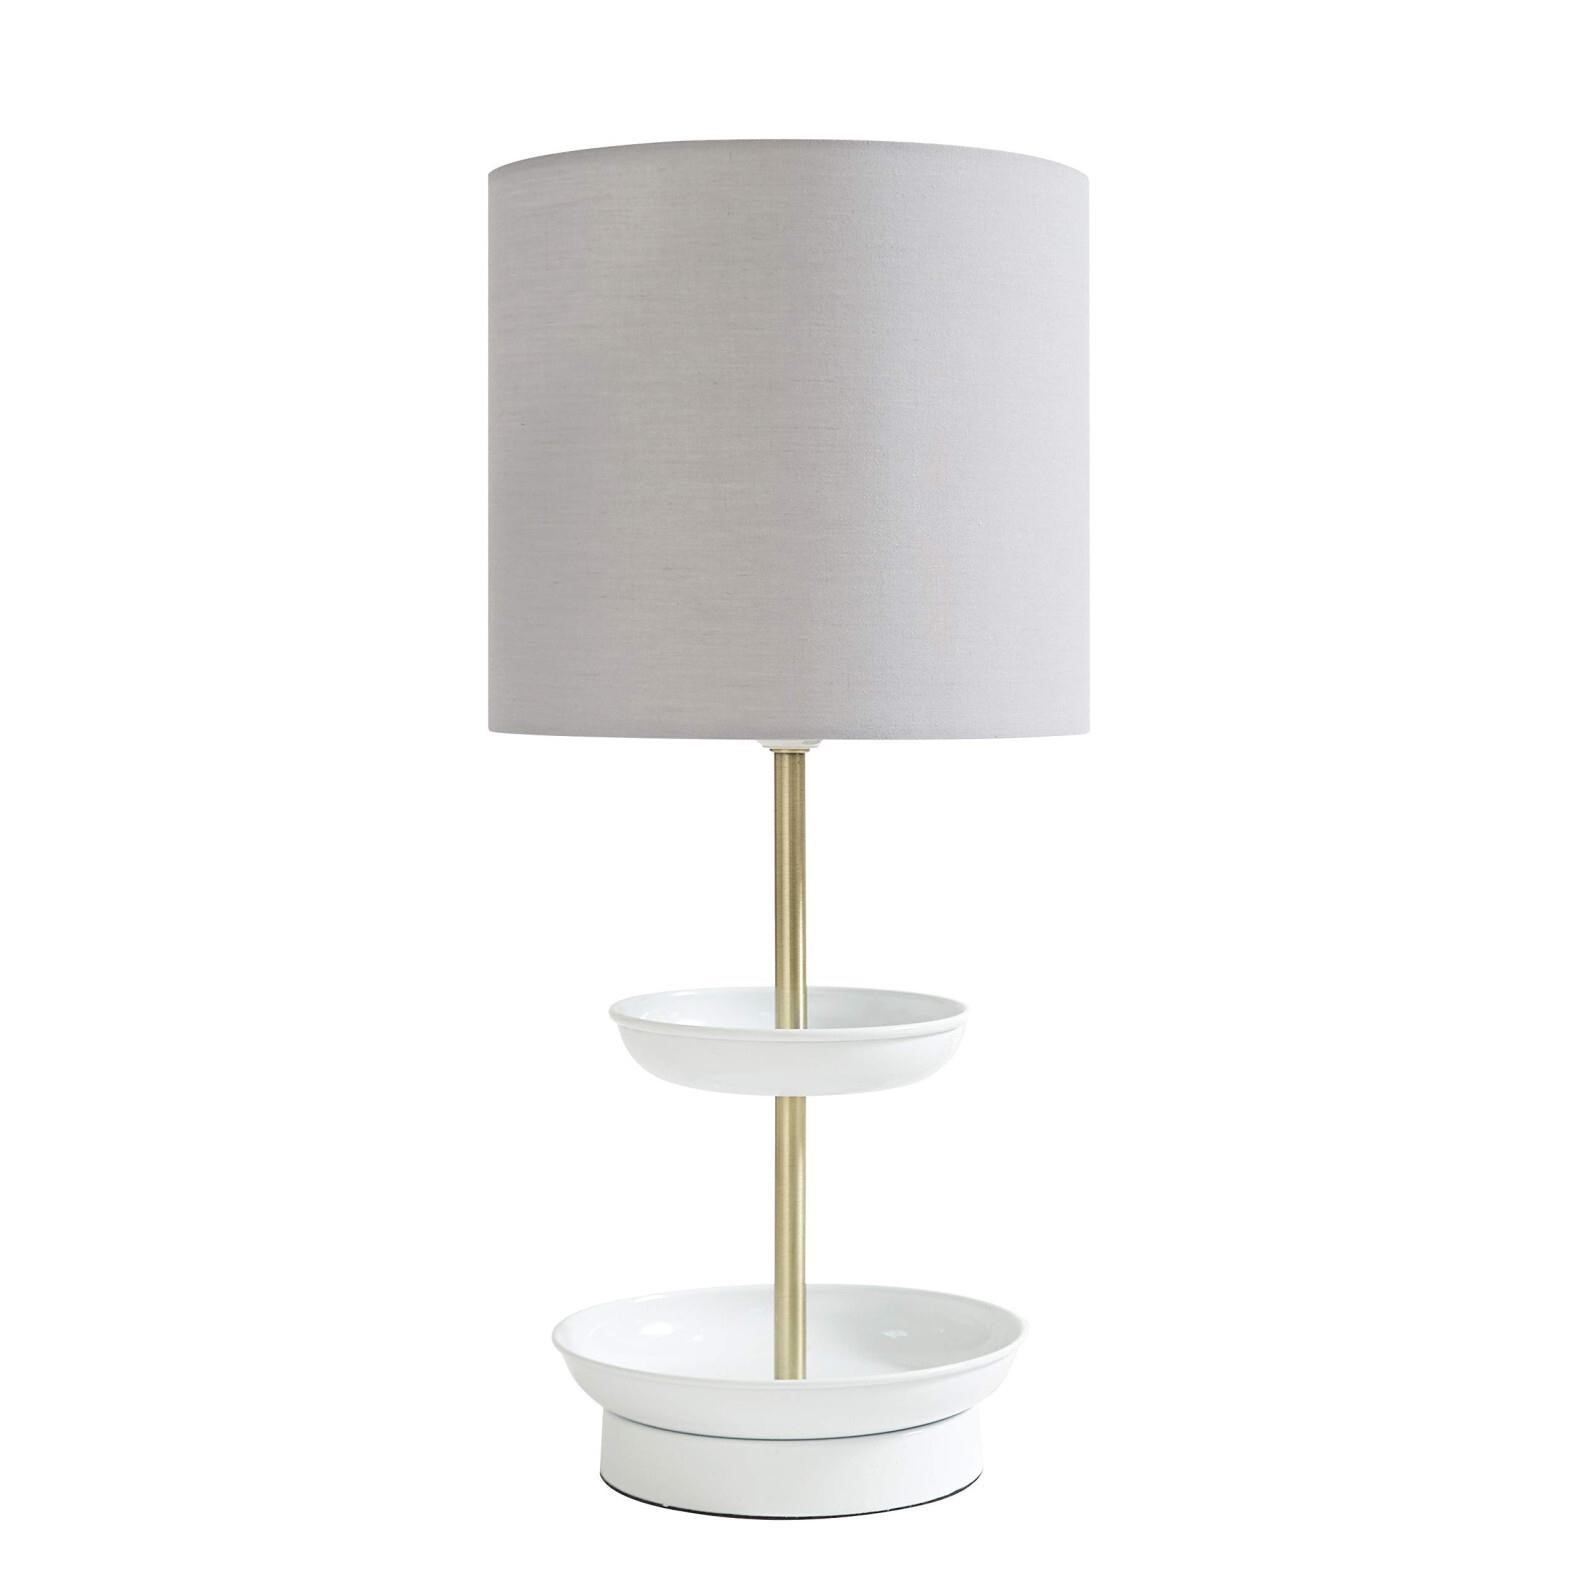 Urban Lifestyle Two Tier Lamp with Catch-All Base,